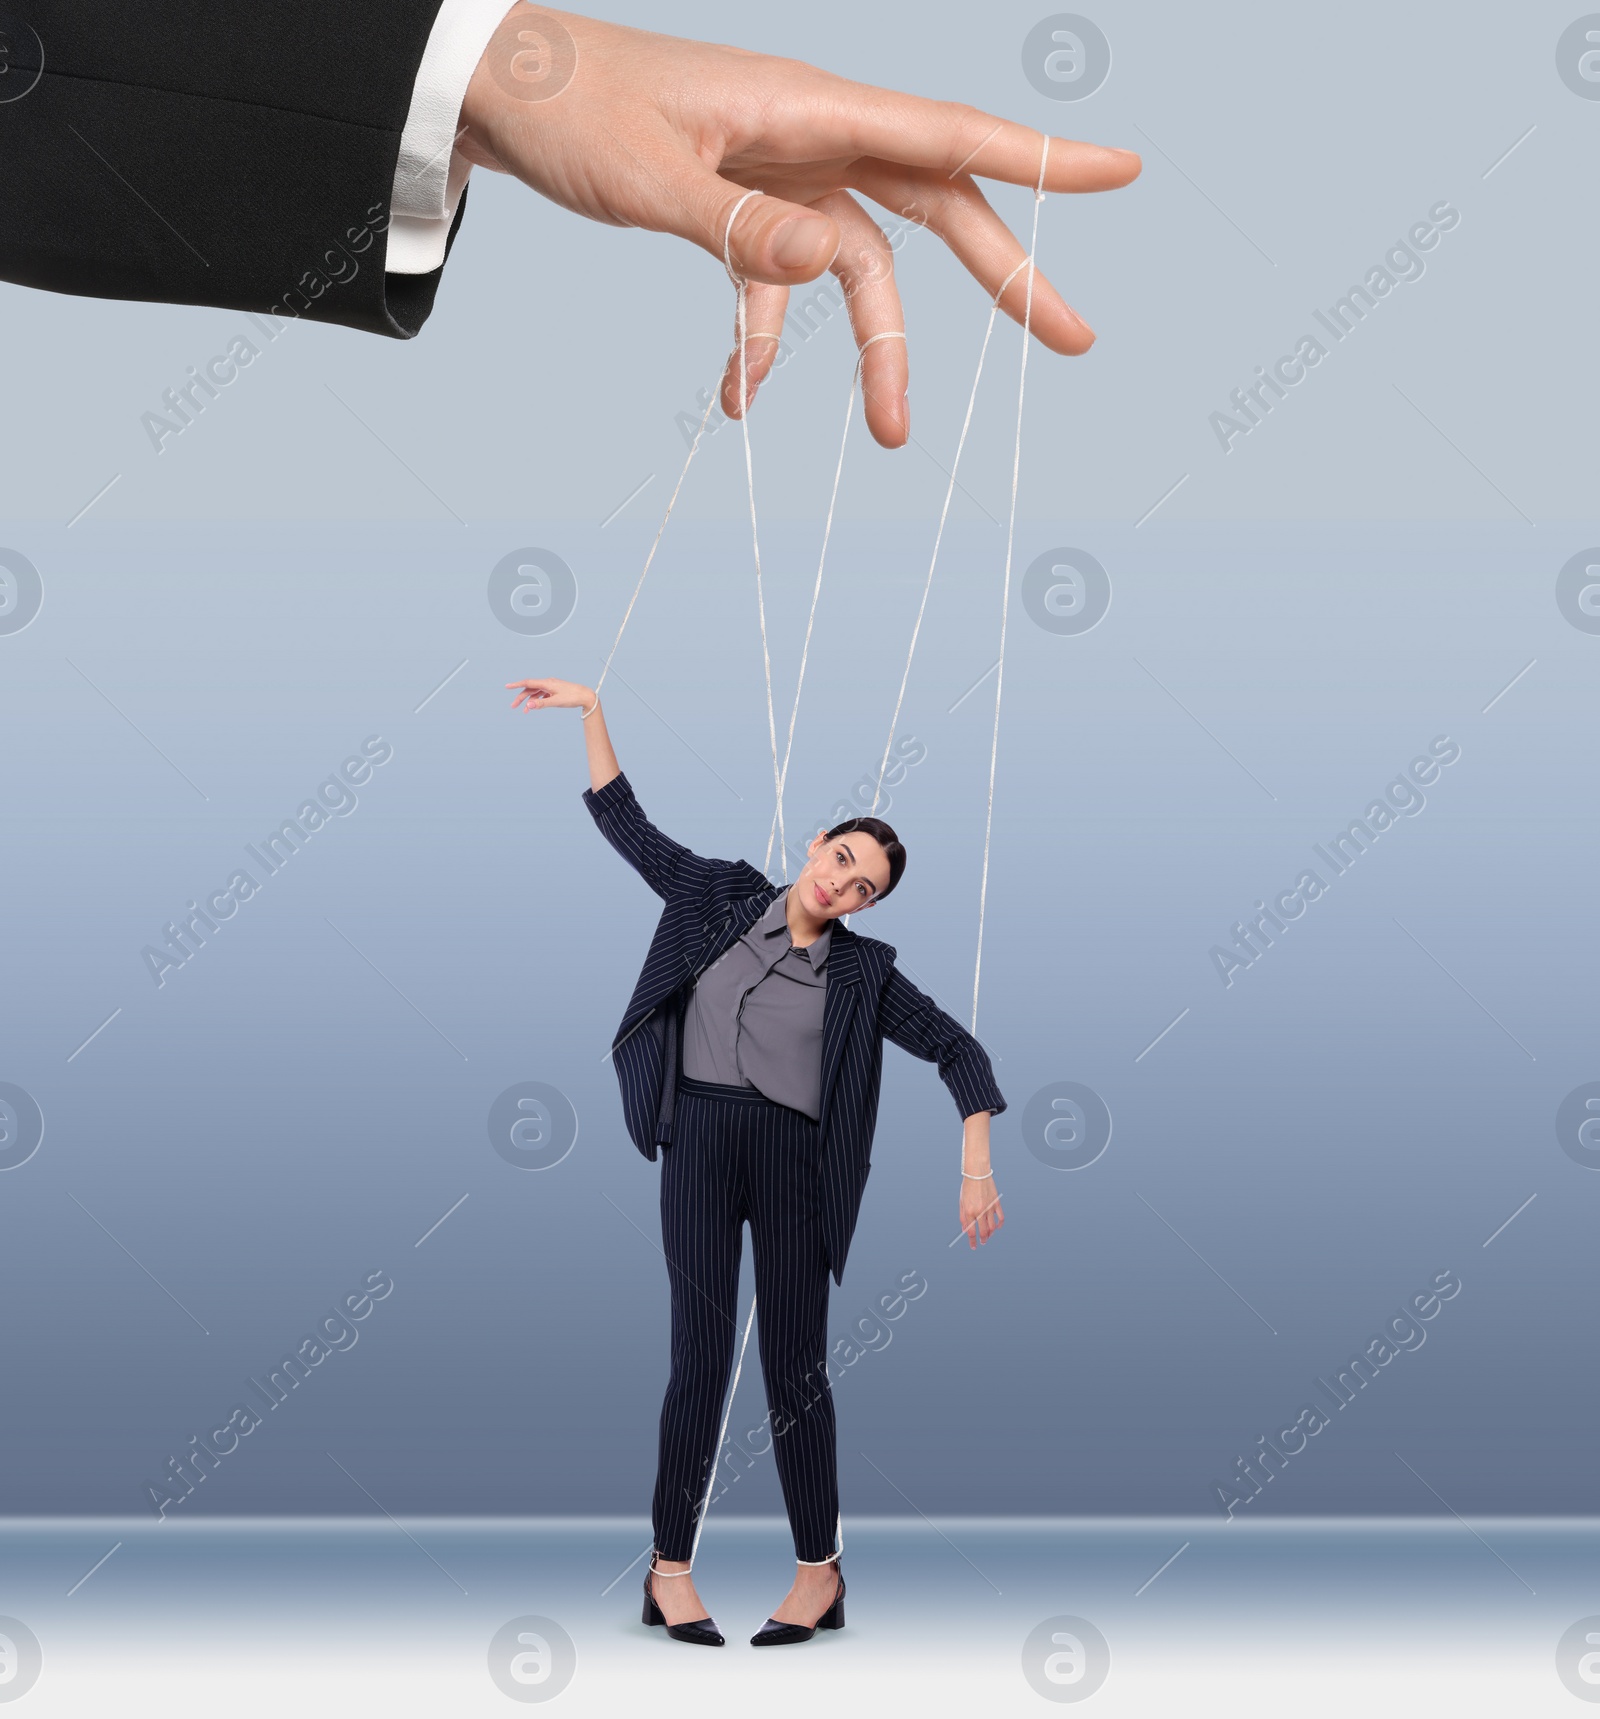 Image of Human relationships demonstrated in puppet show. Worker manipulated by director or manager on light blue background